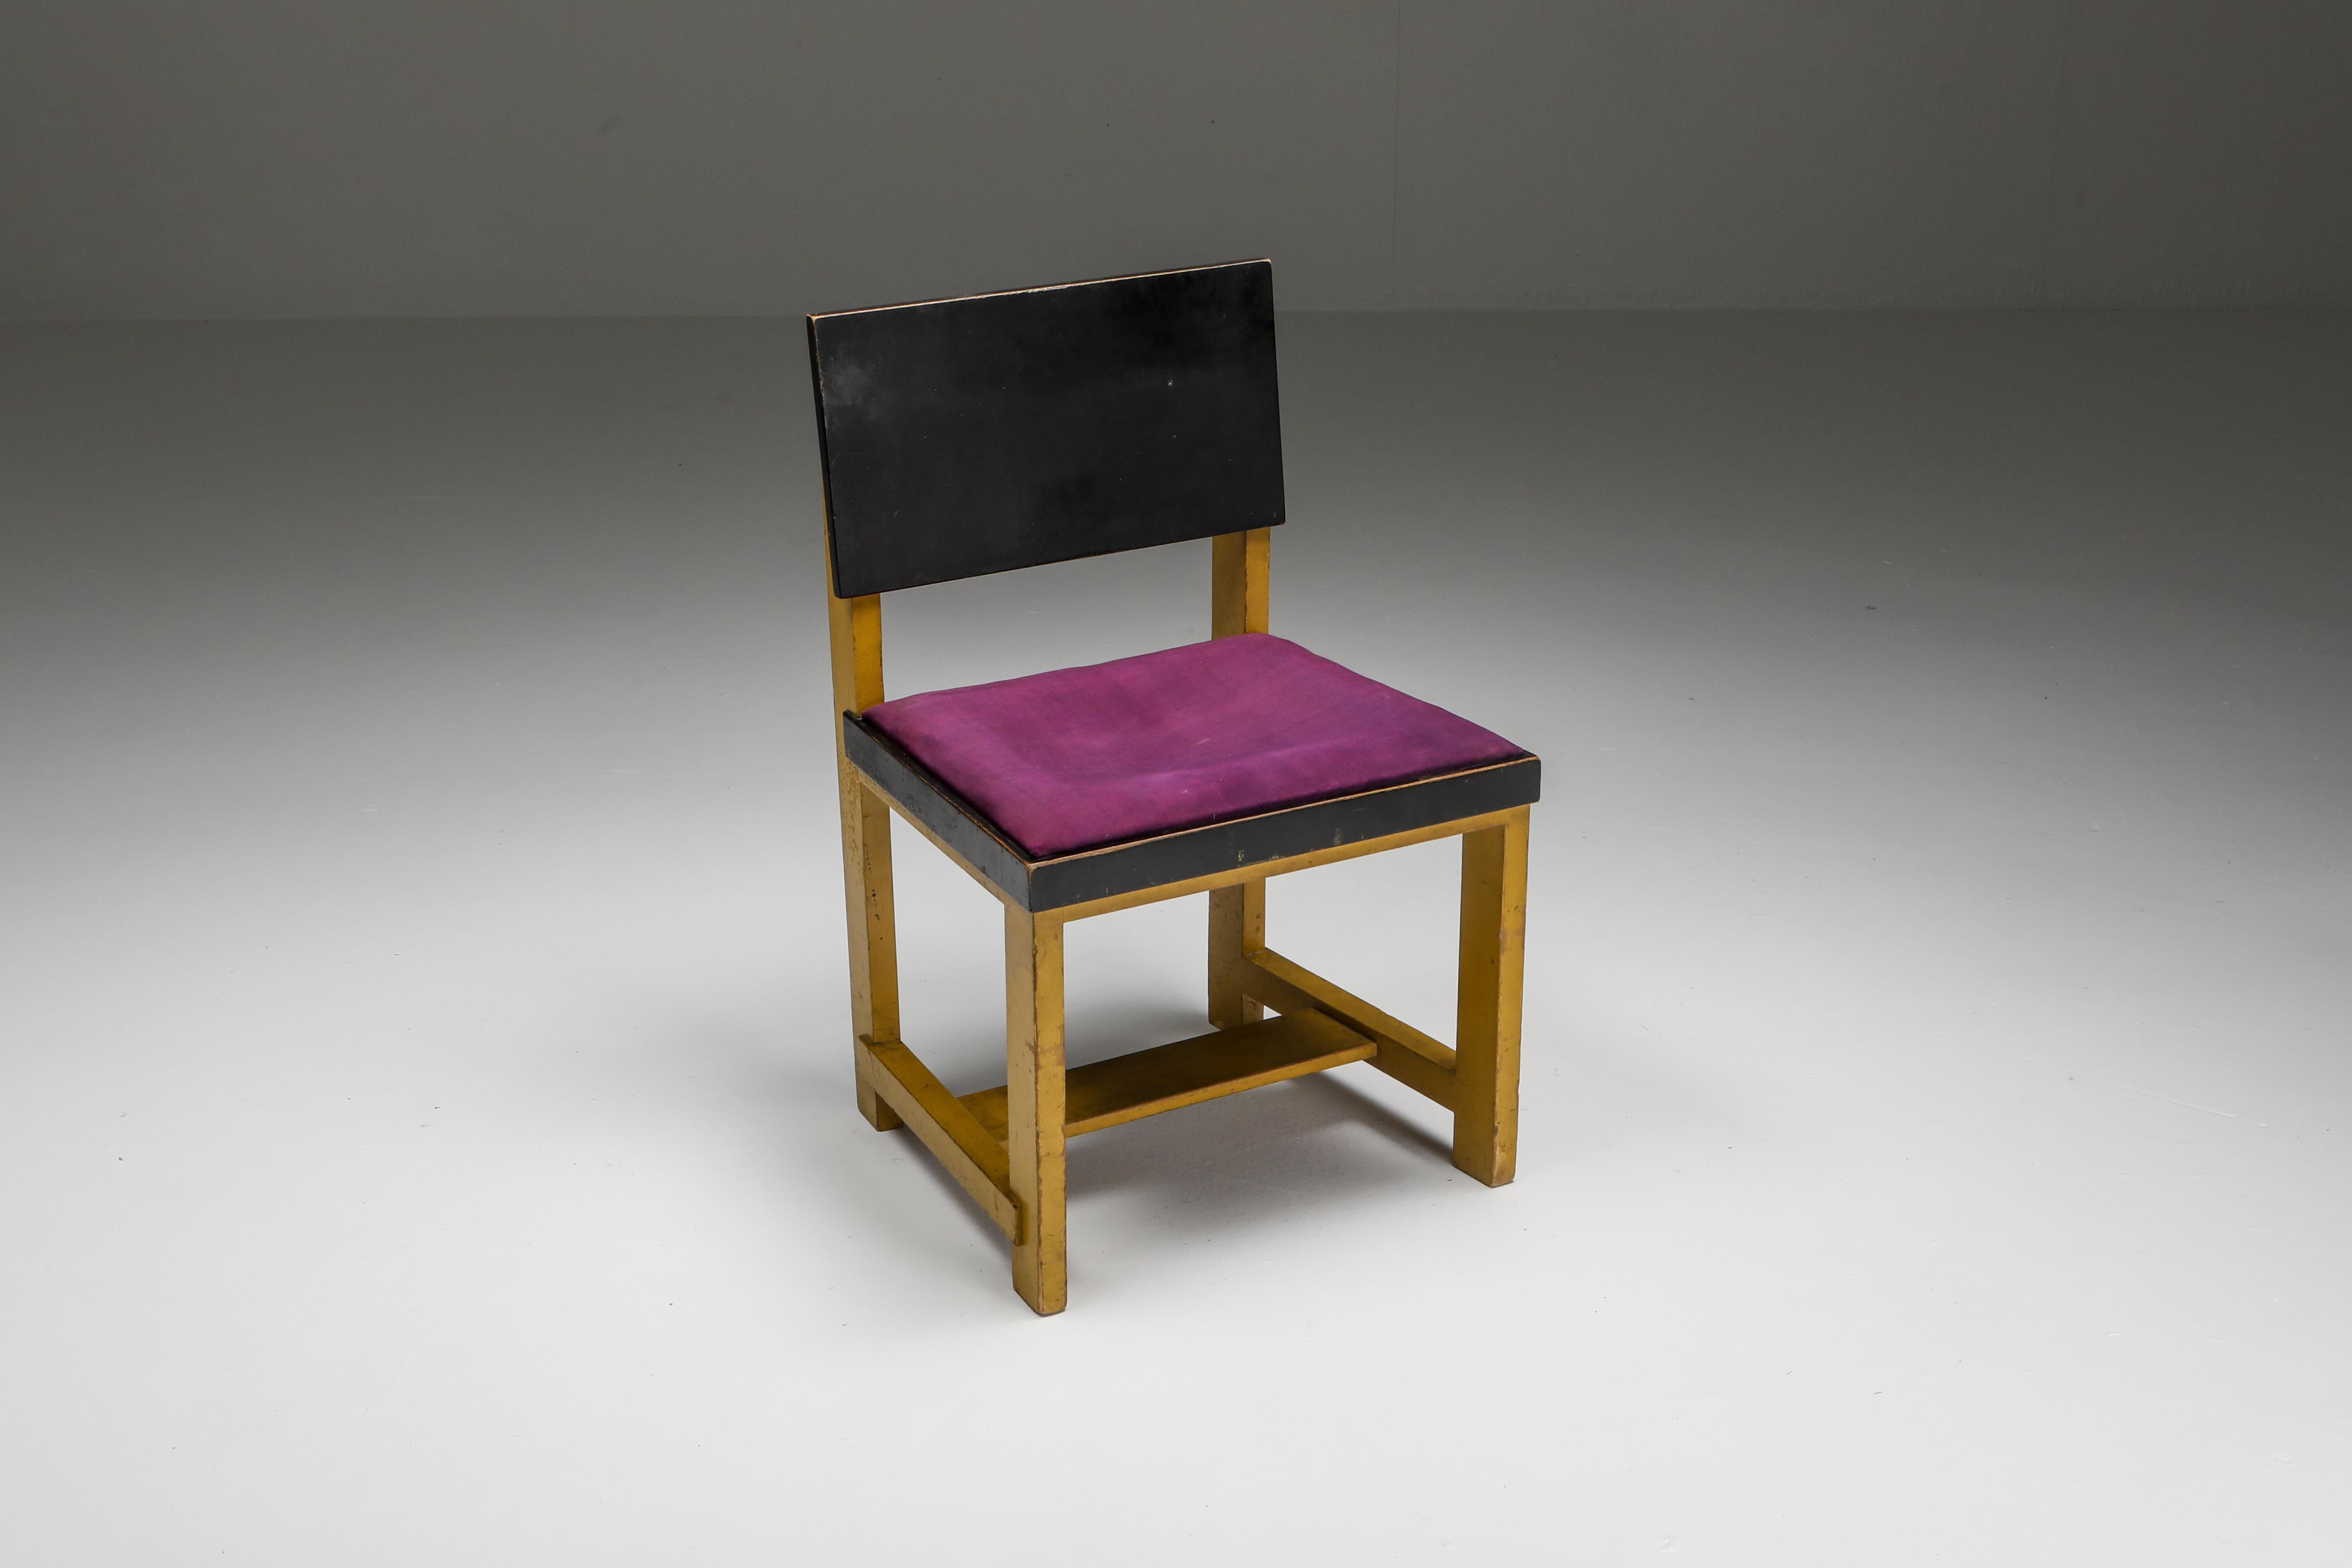 Yellow and black modernist chair, by Hendrik Wouda, H. Pander & Zonen, Netherlands, 1924.

Painted pine

Part of the Exhibition 